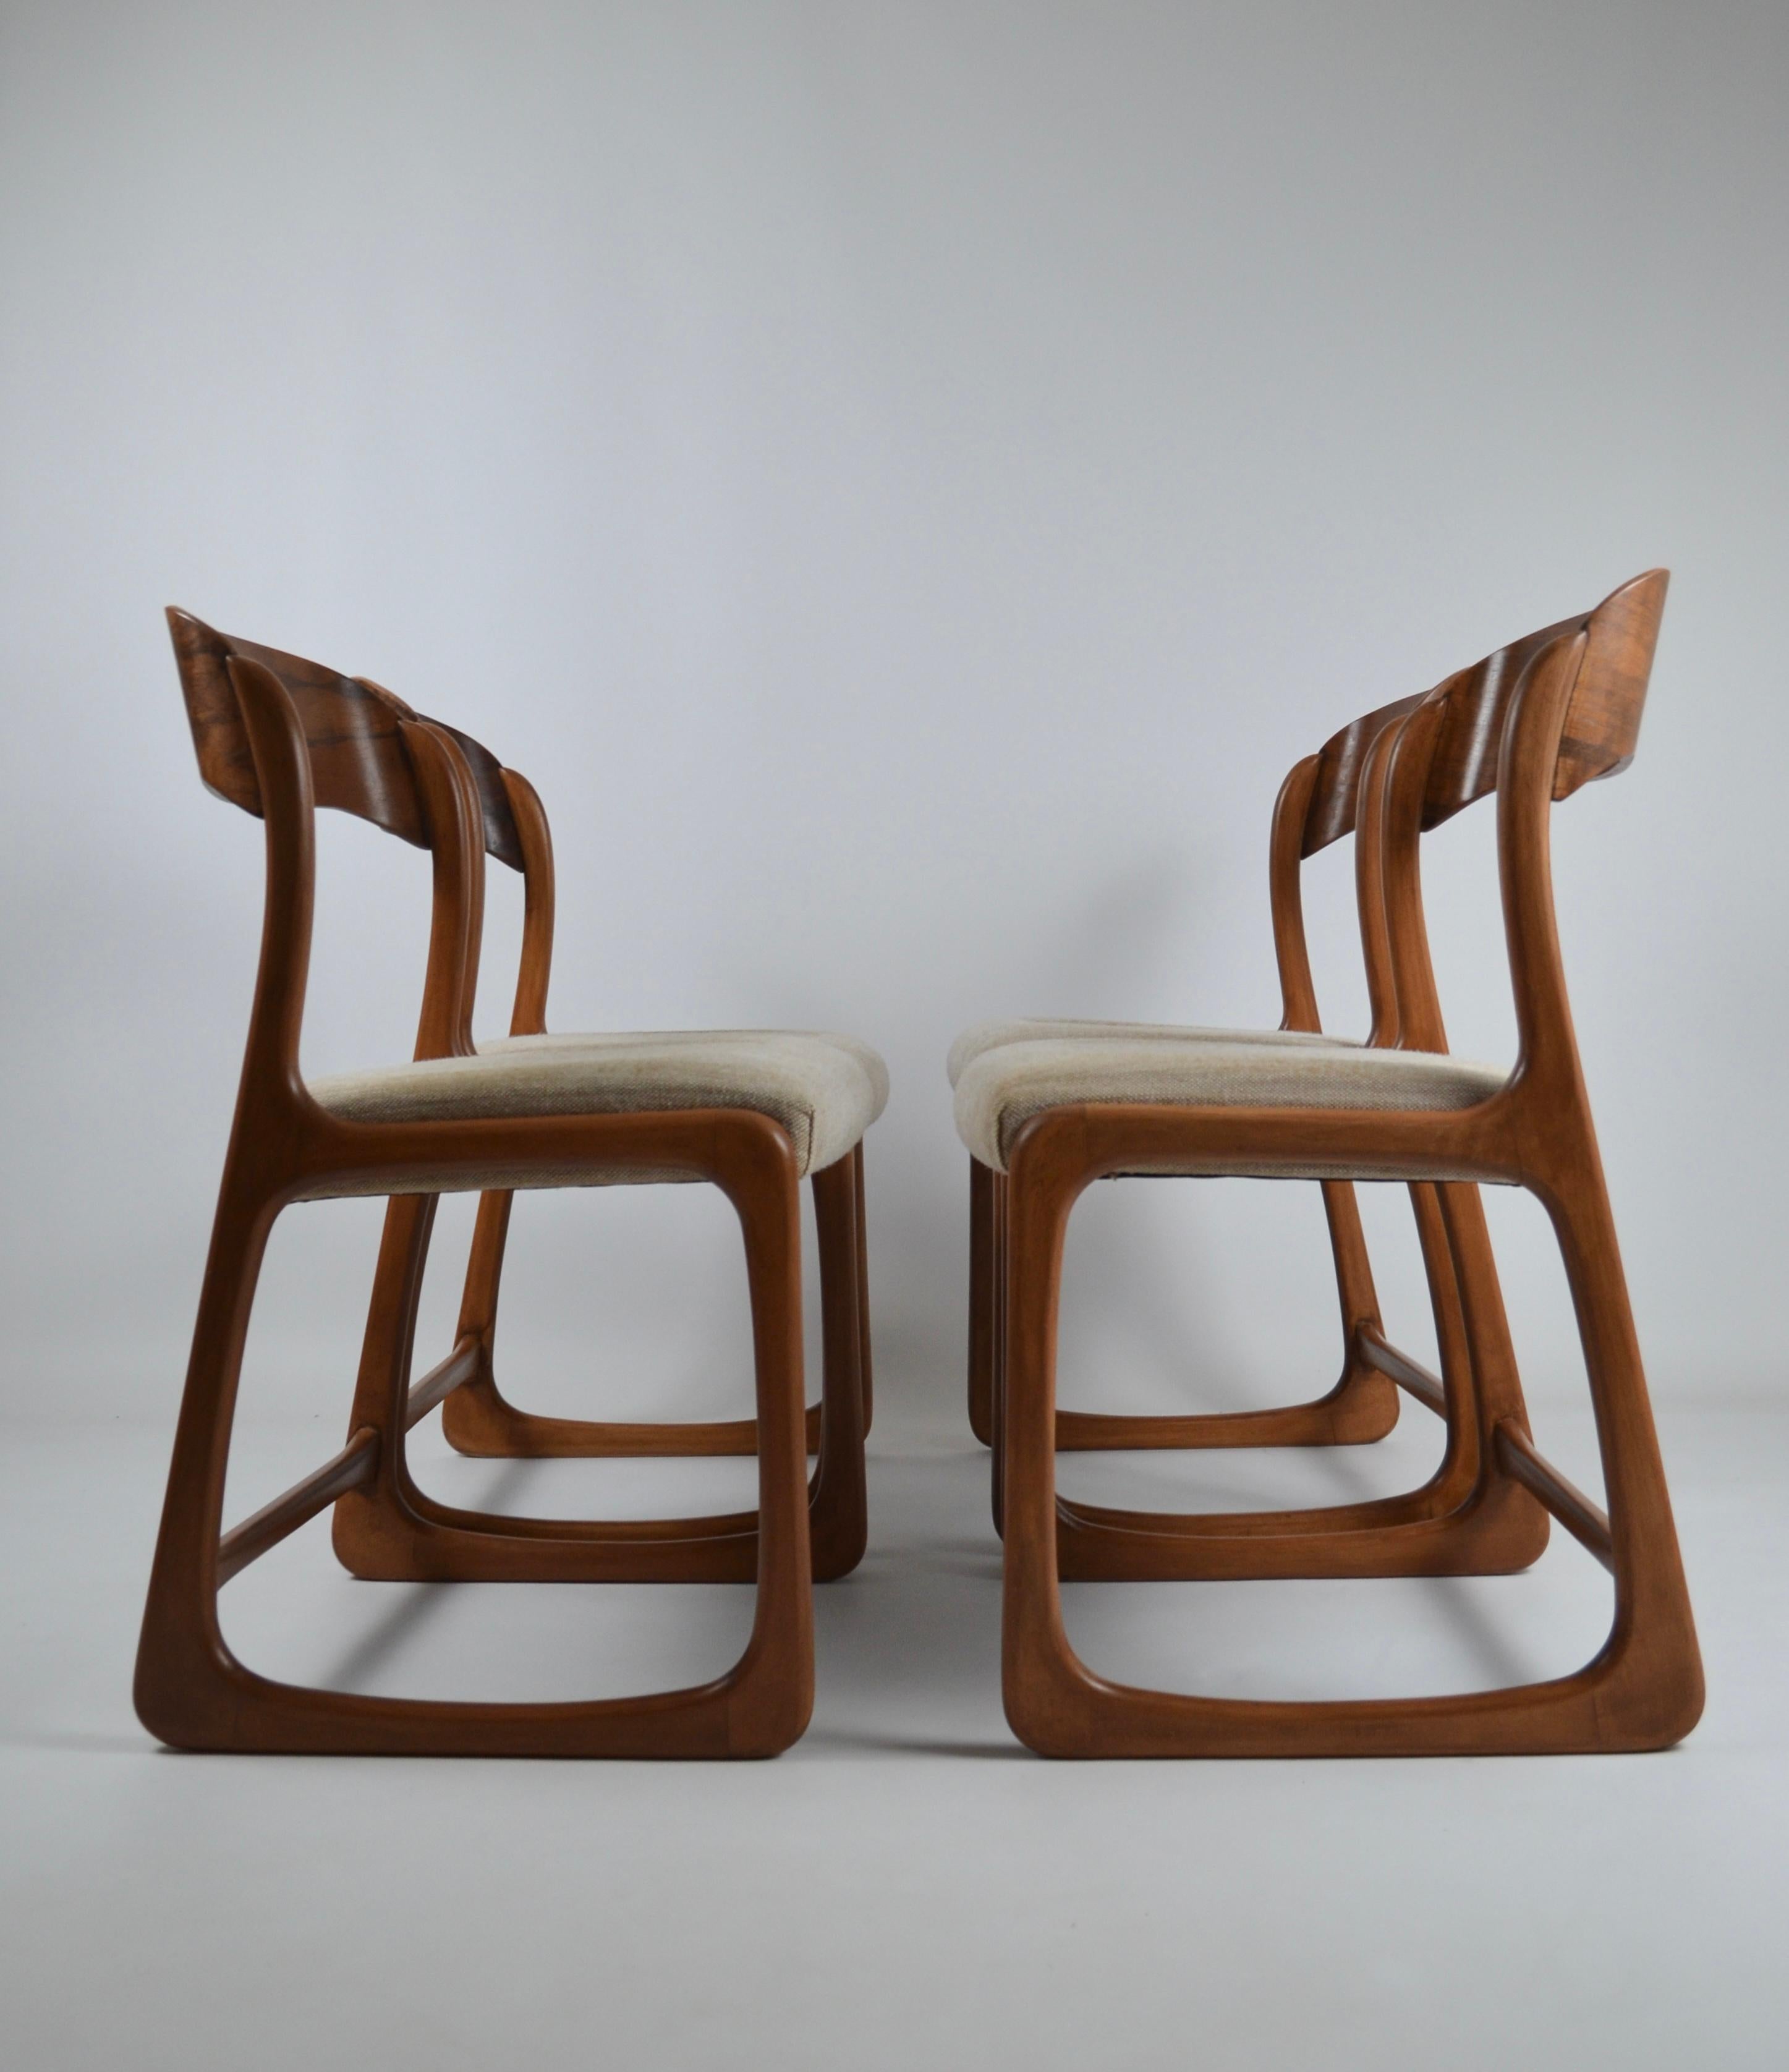 Wood Vintage French Traineau or Sleigh Dining Chairs, Baumann, France, 60s For Sale